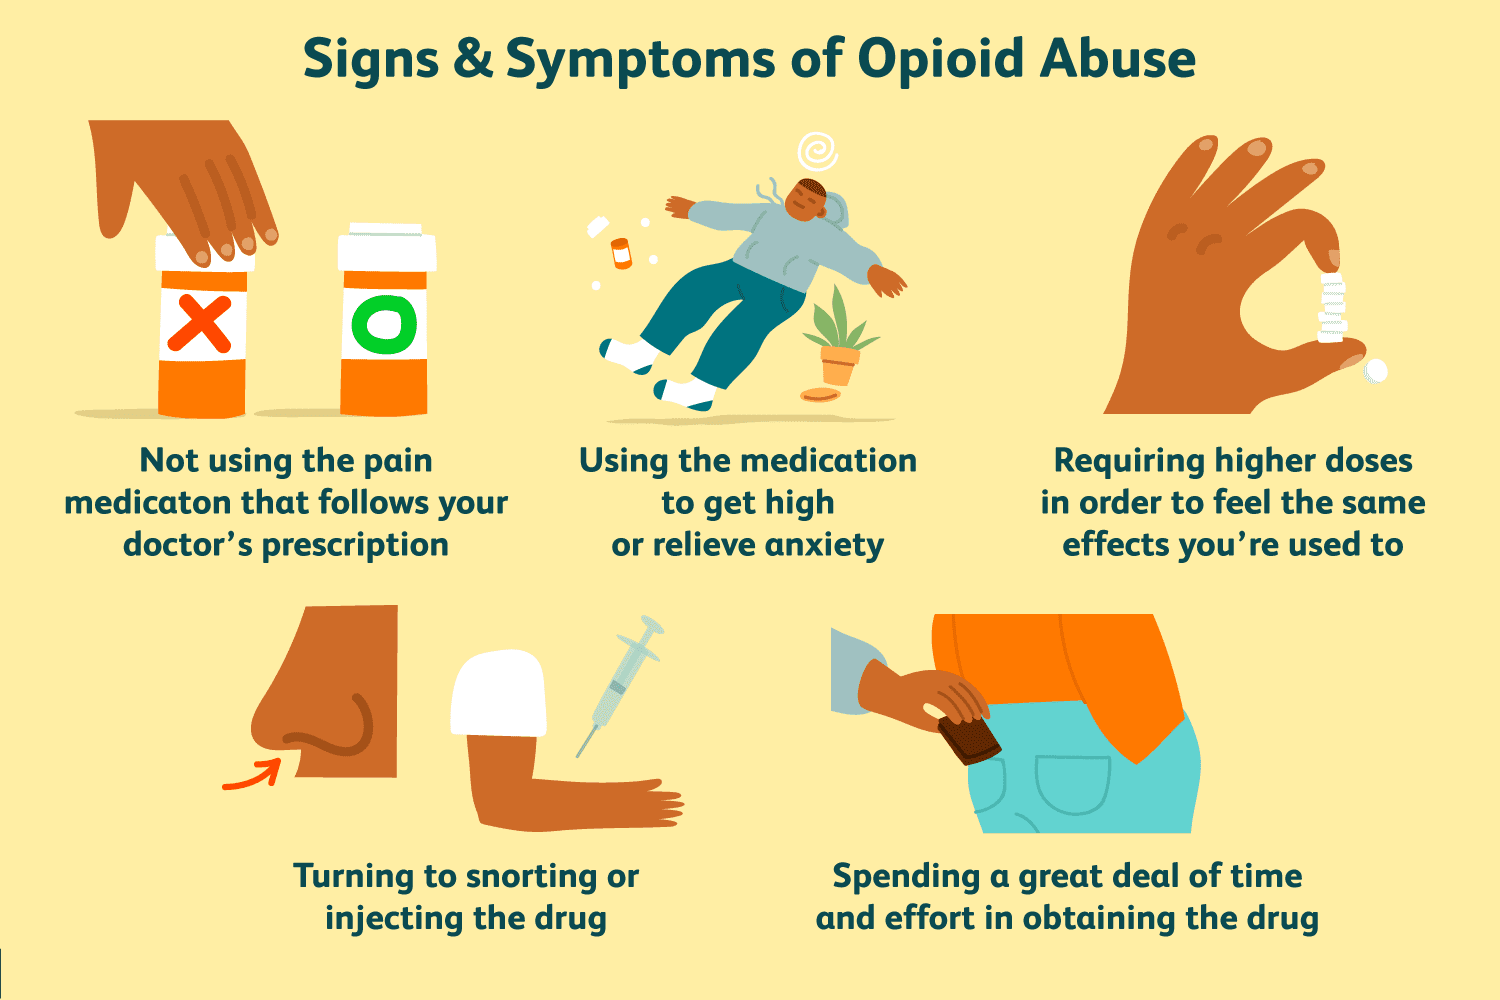 Signs and Symptoms of Opioid Abuse